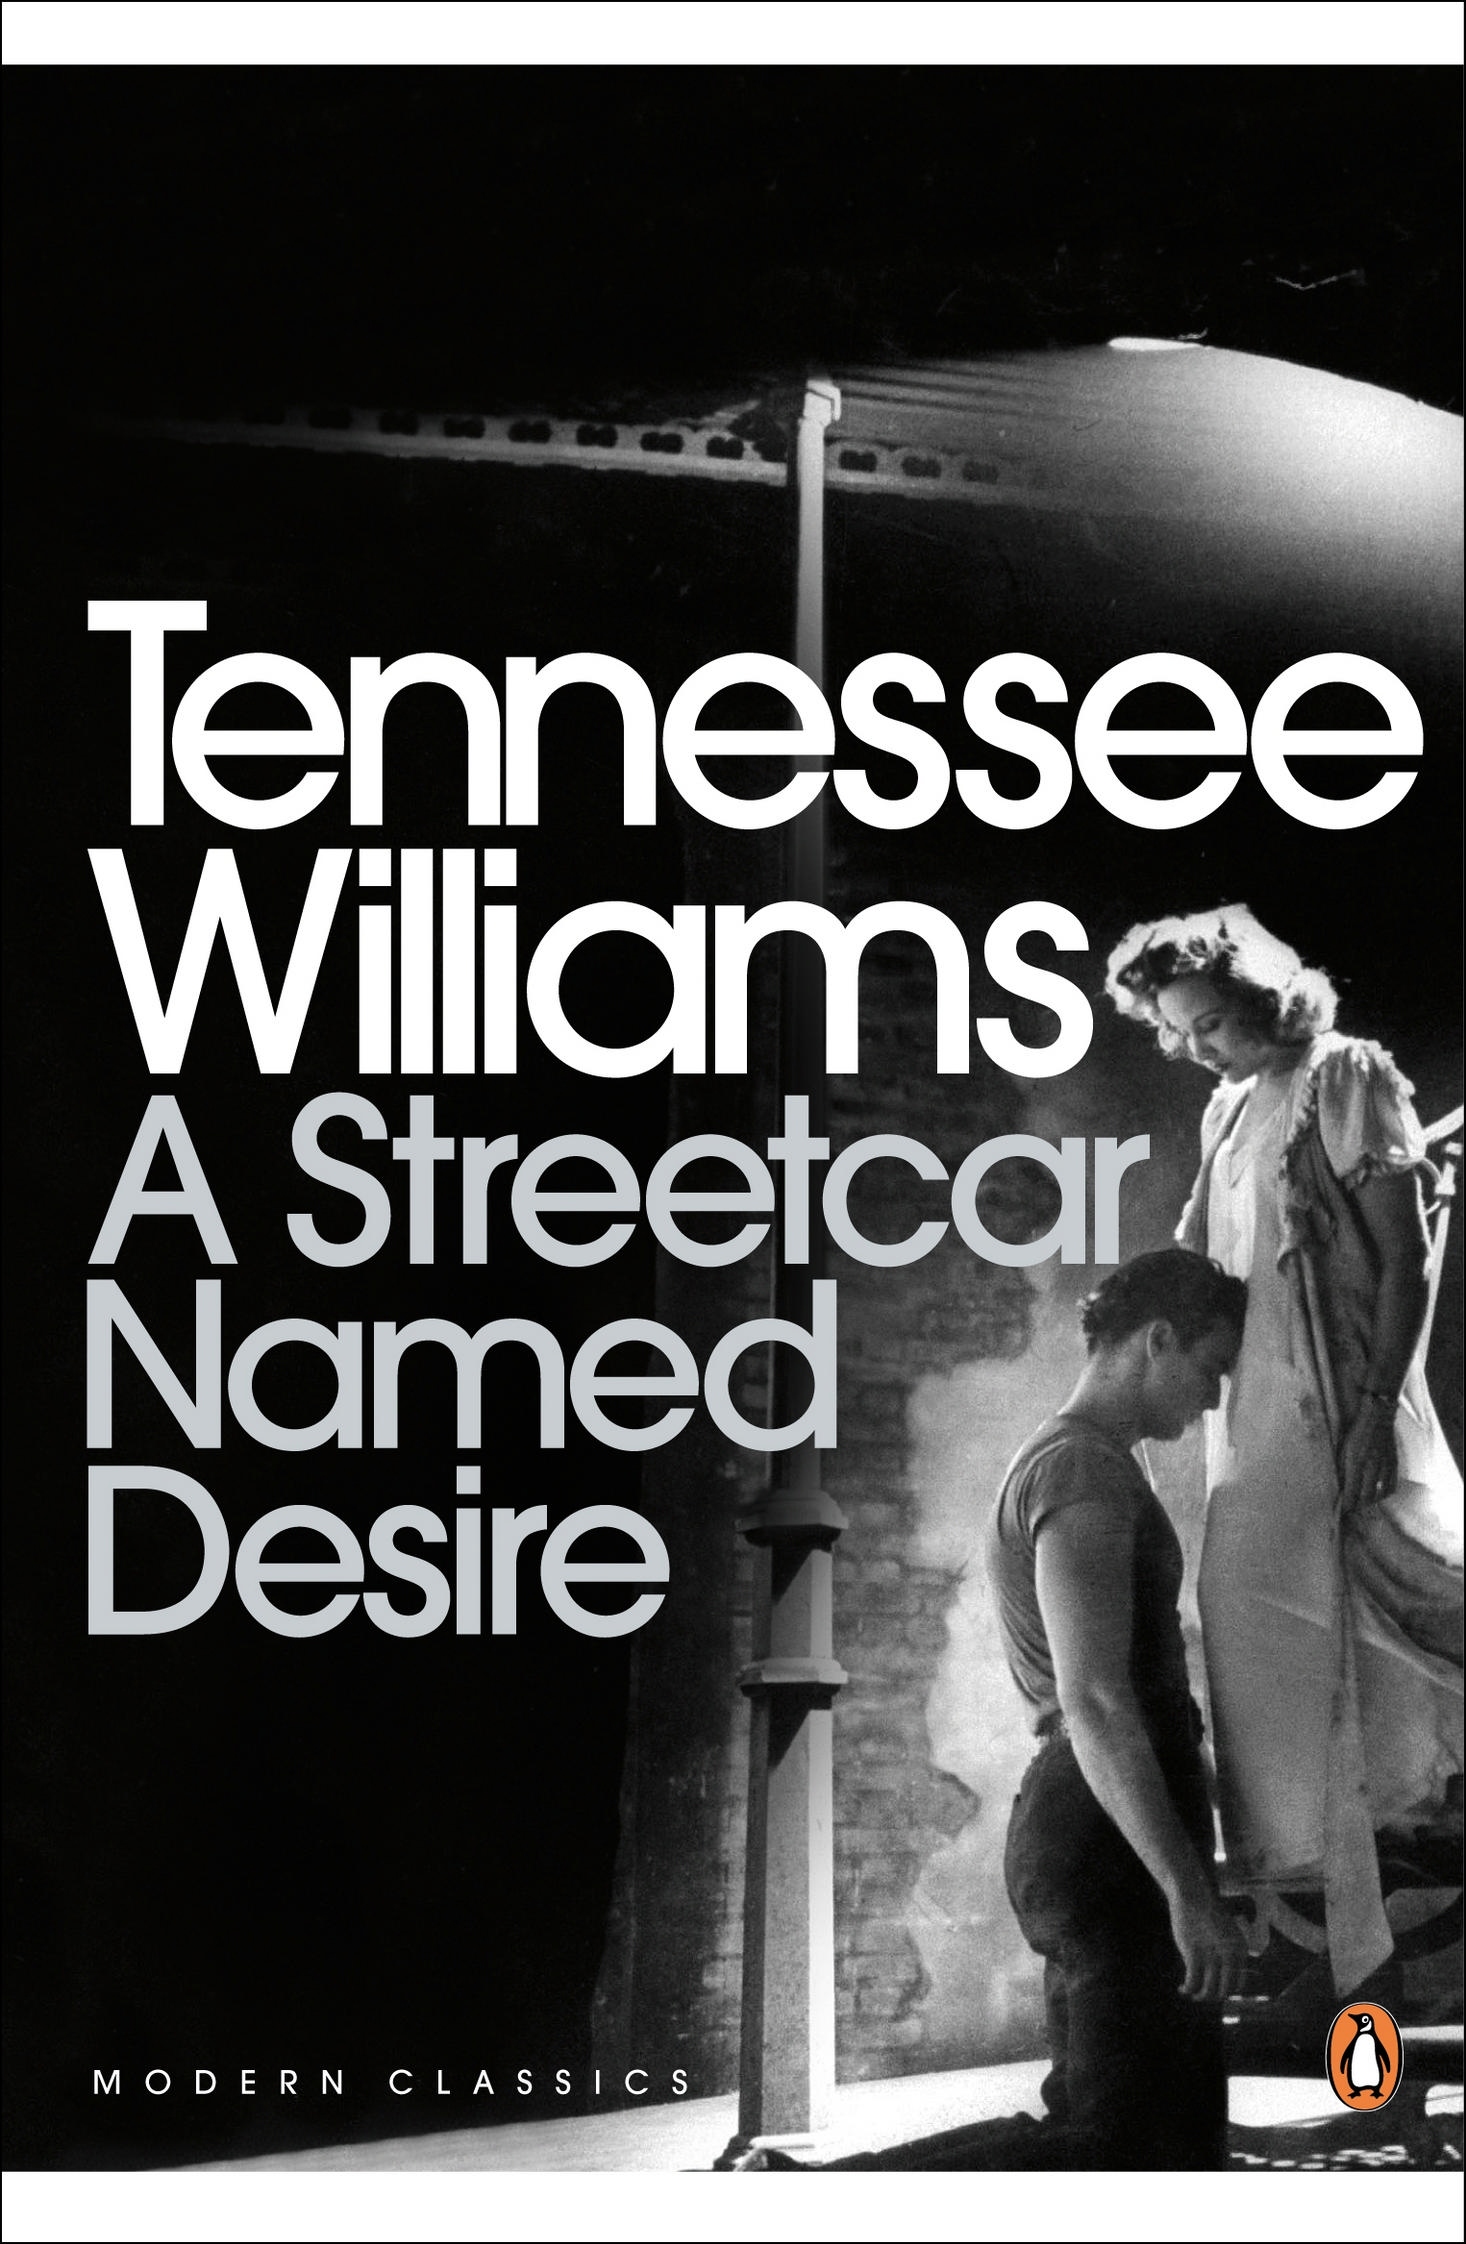 A review of the novel a streetcar named desire by tennessee william